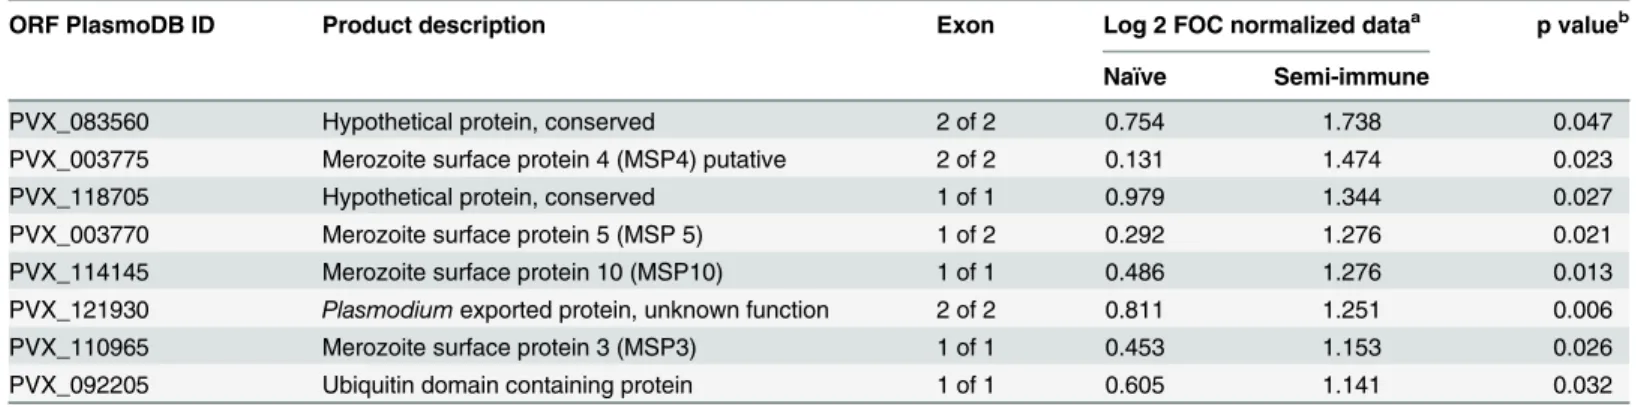 Table 1. The PlasmoDB gene ID and description of the top antigens that discriminate between naïve and semi-immune individuals at baseline.